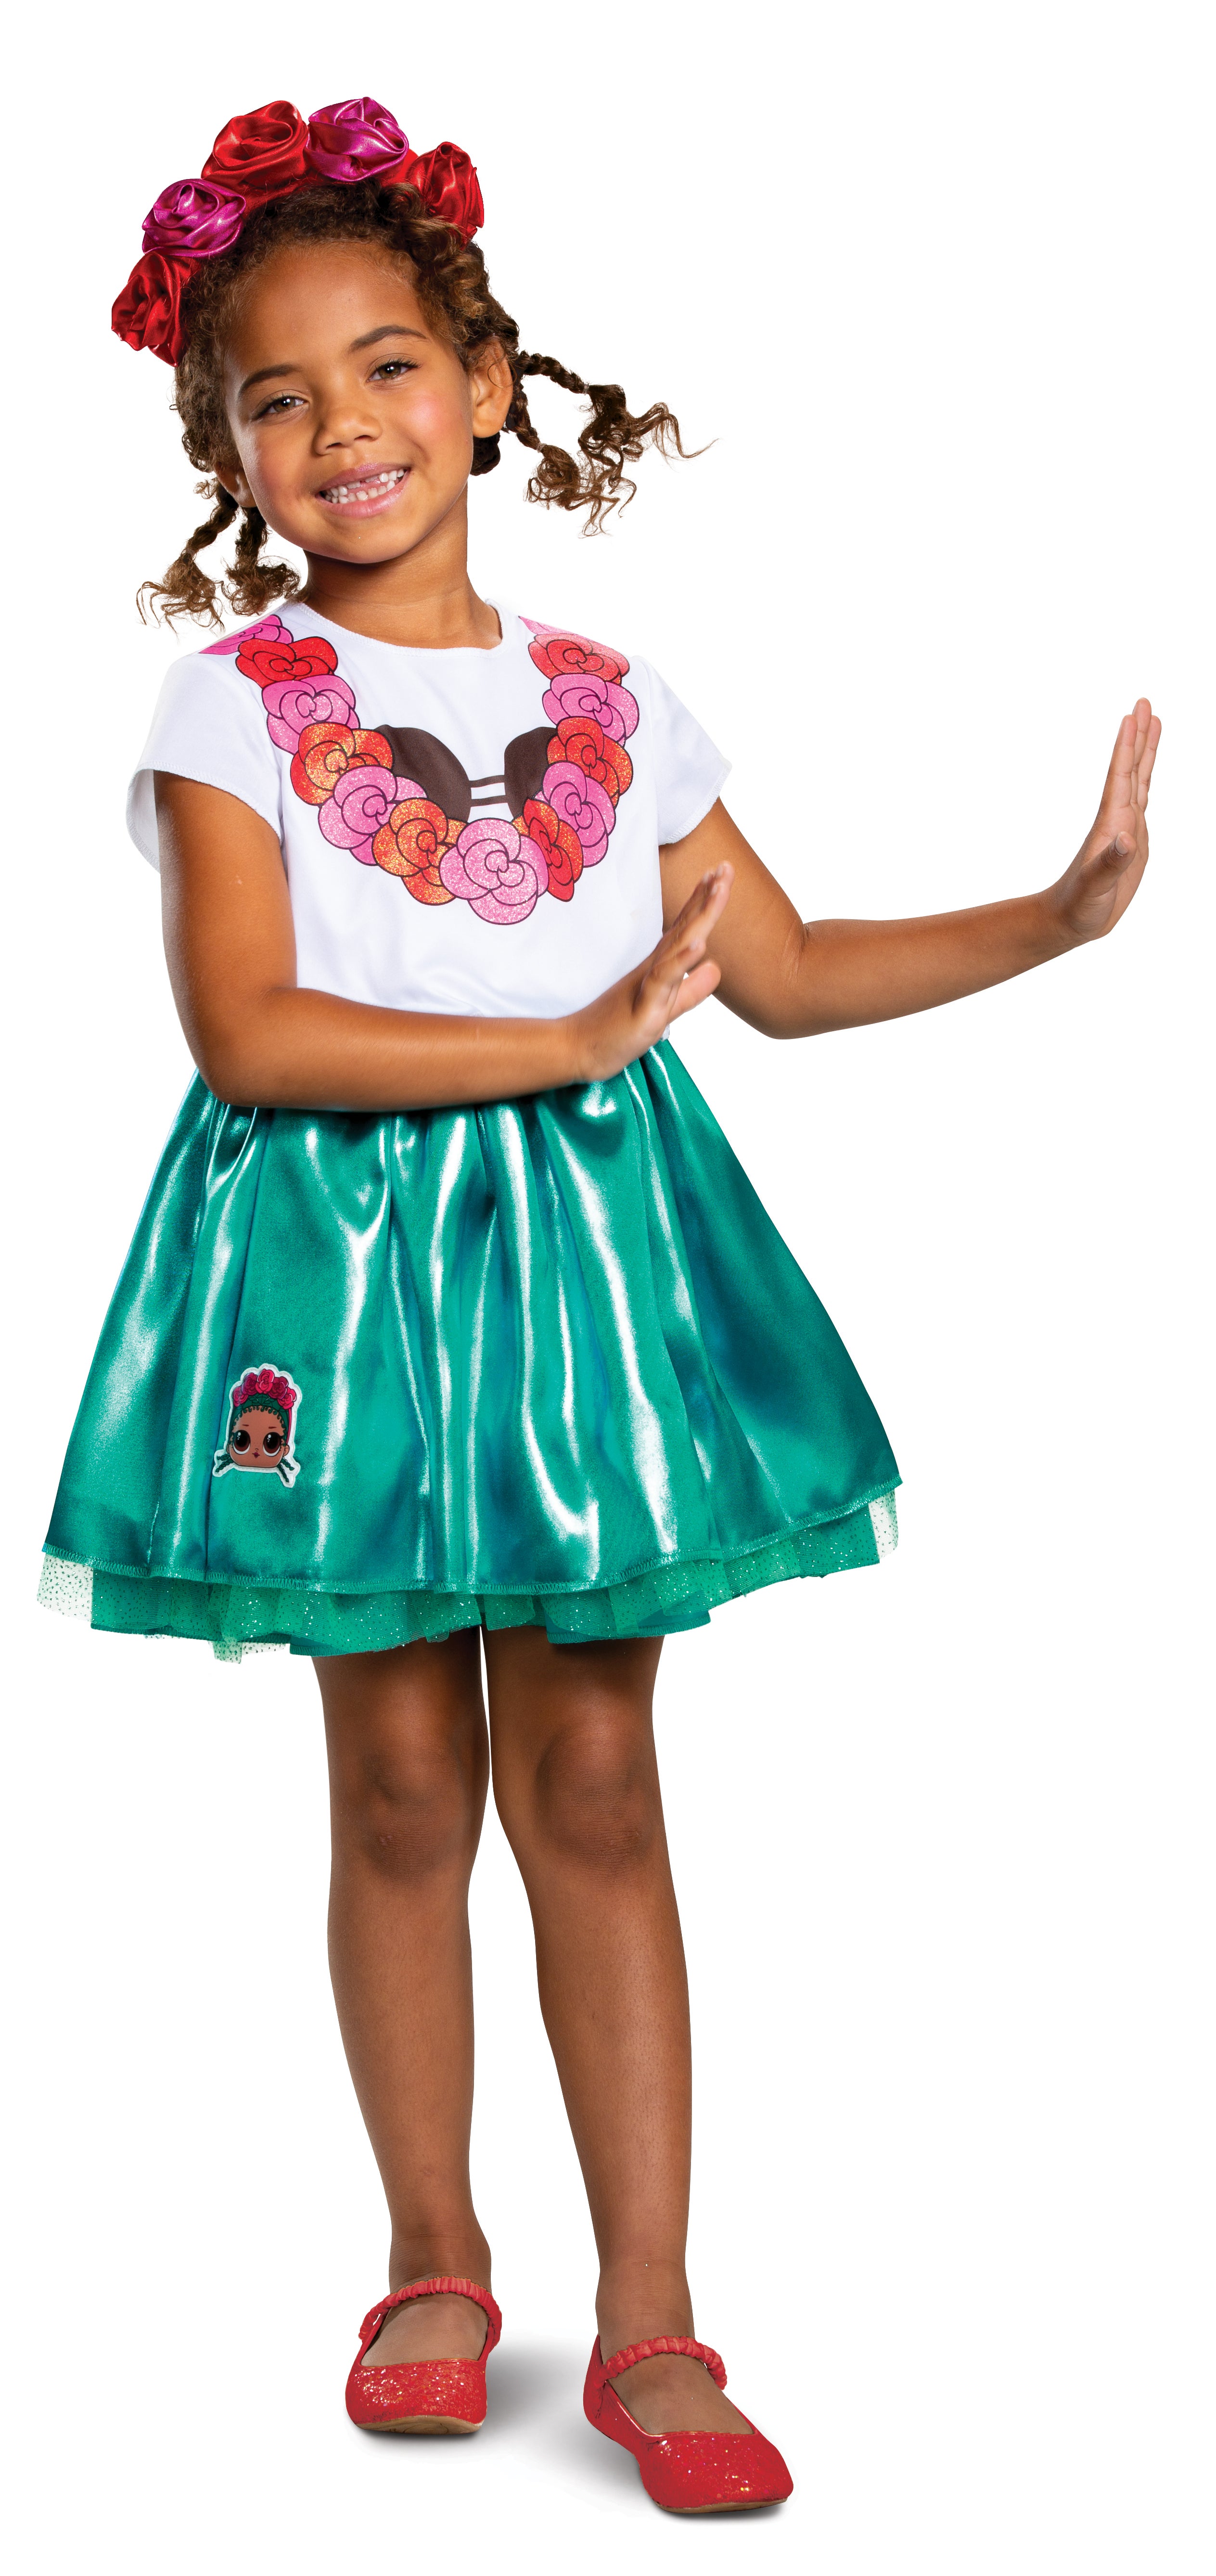 Shop These Adorable & Affordable Kids Costumes for Halloween